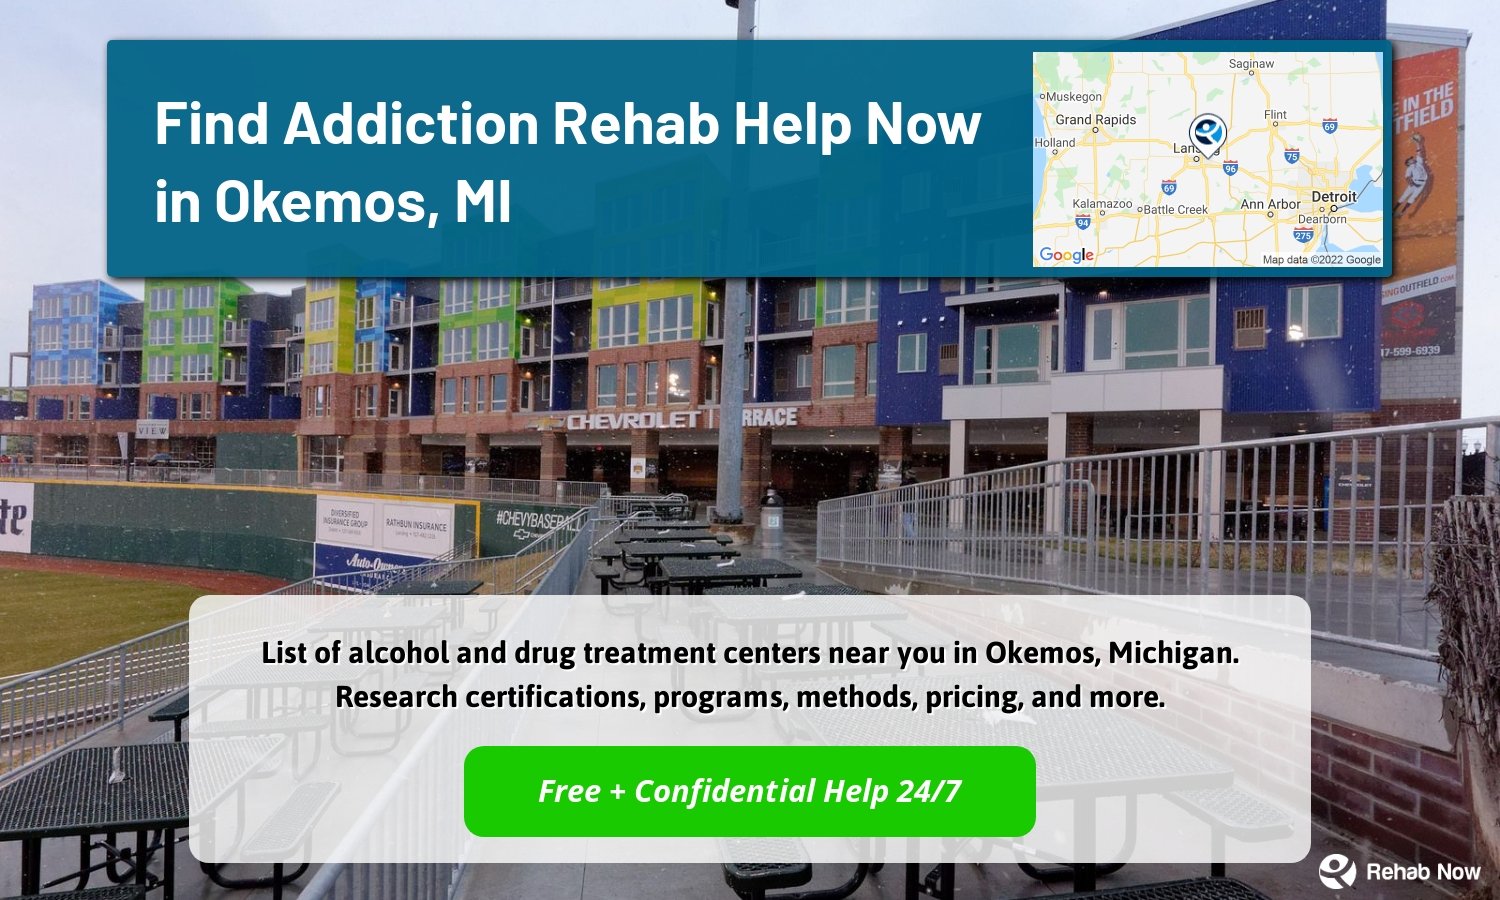 List of alcohol and drug treatment centers near you in Okemos, Michigan. Research certifications, programs, methods, pricing, and more.